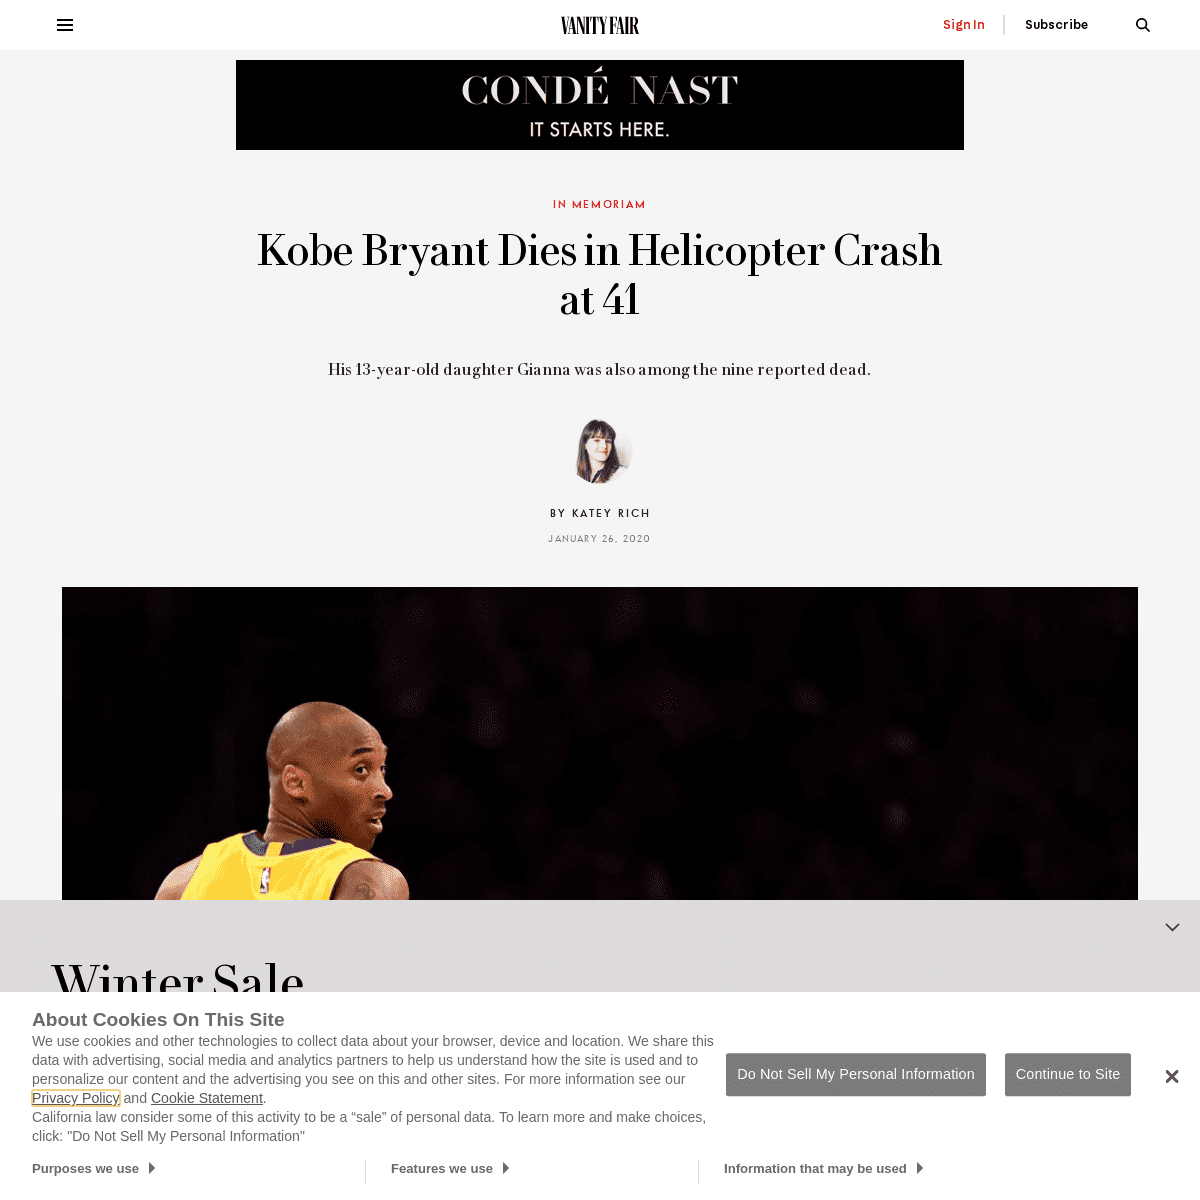 A complete backup of www.vanityfair.com/style/2020/01/kobe-bryant-dead-helicopter-crash